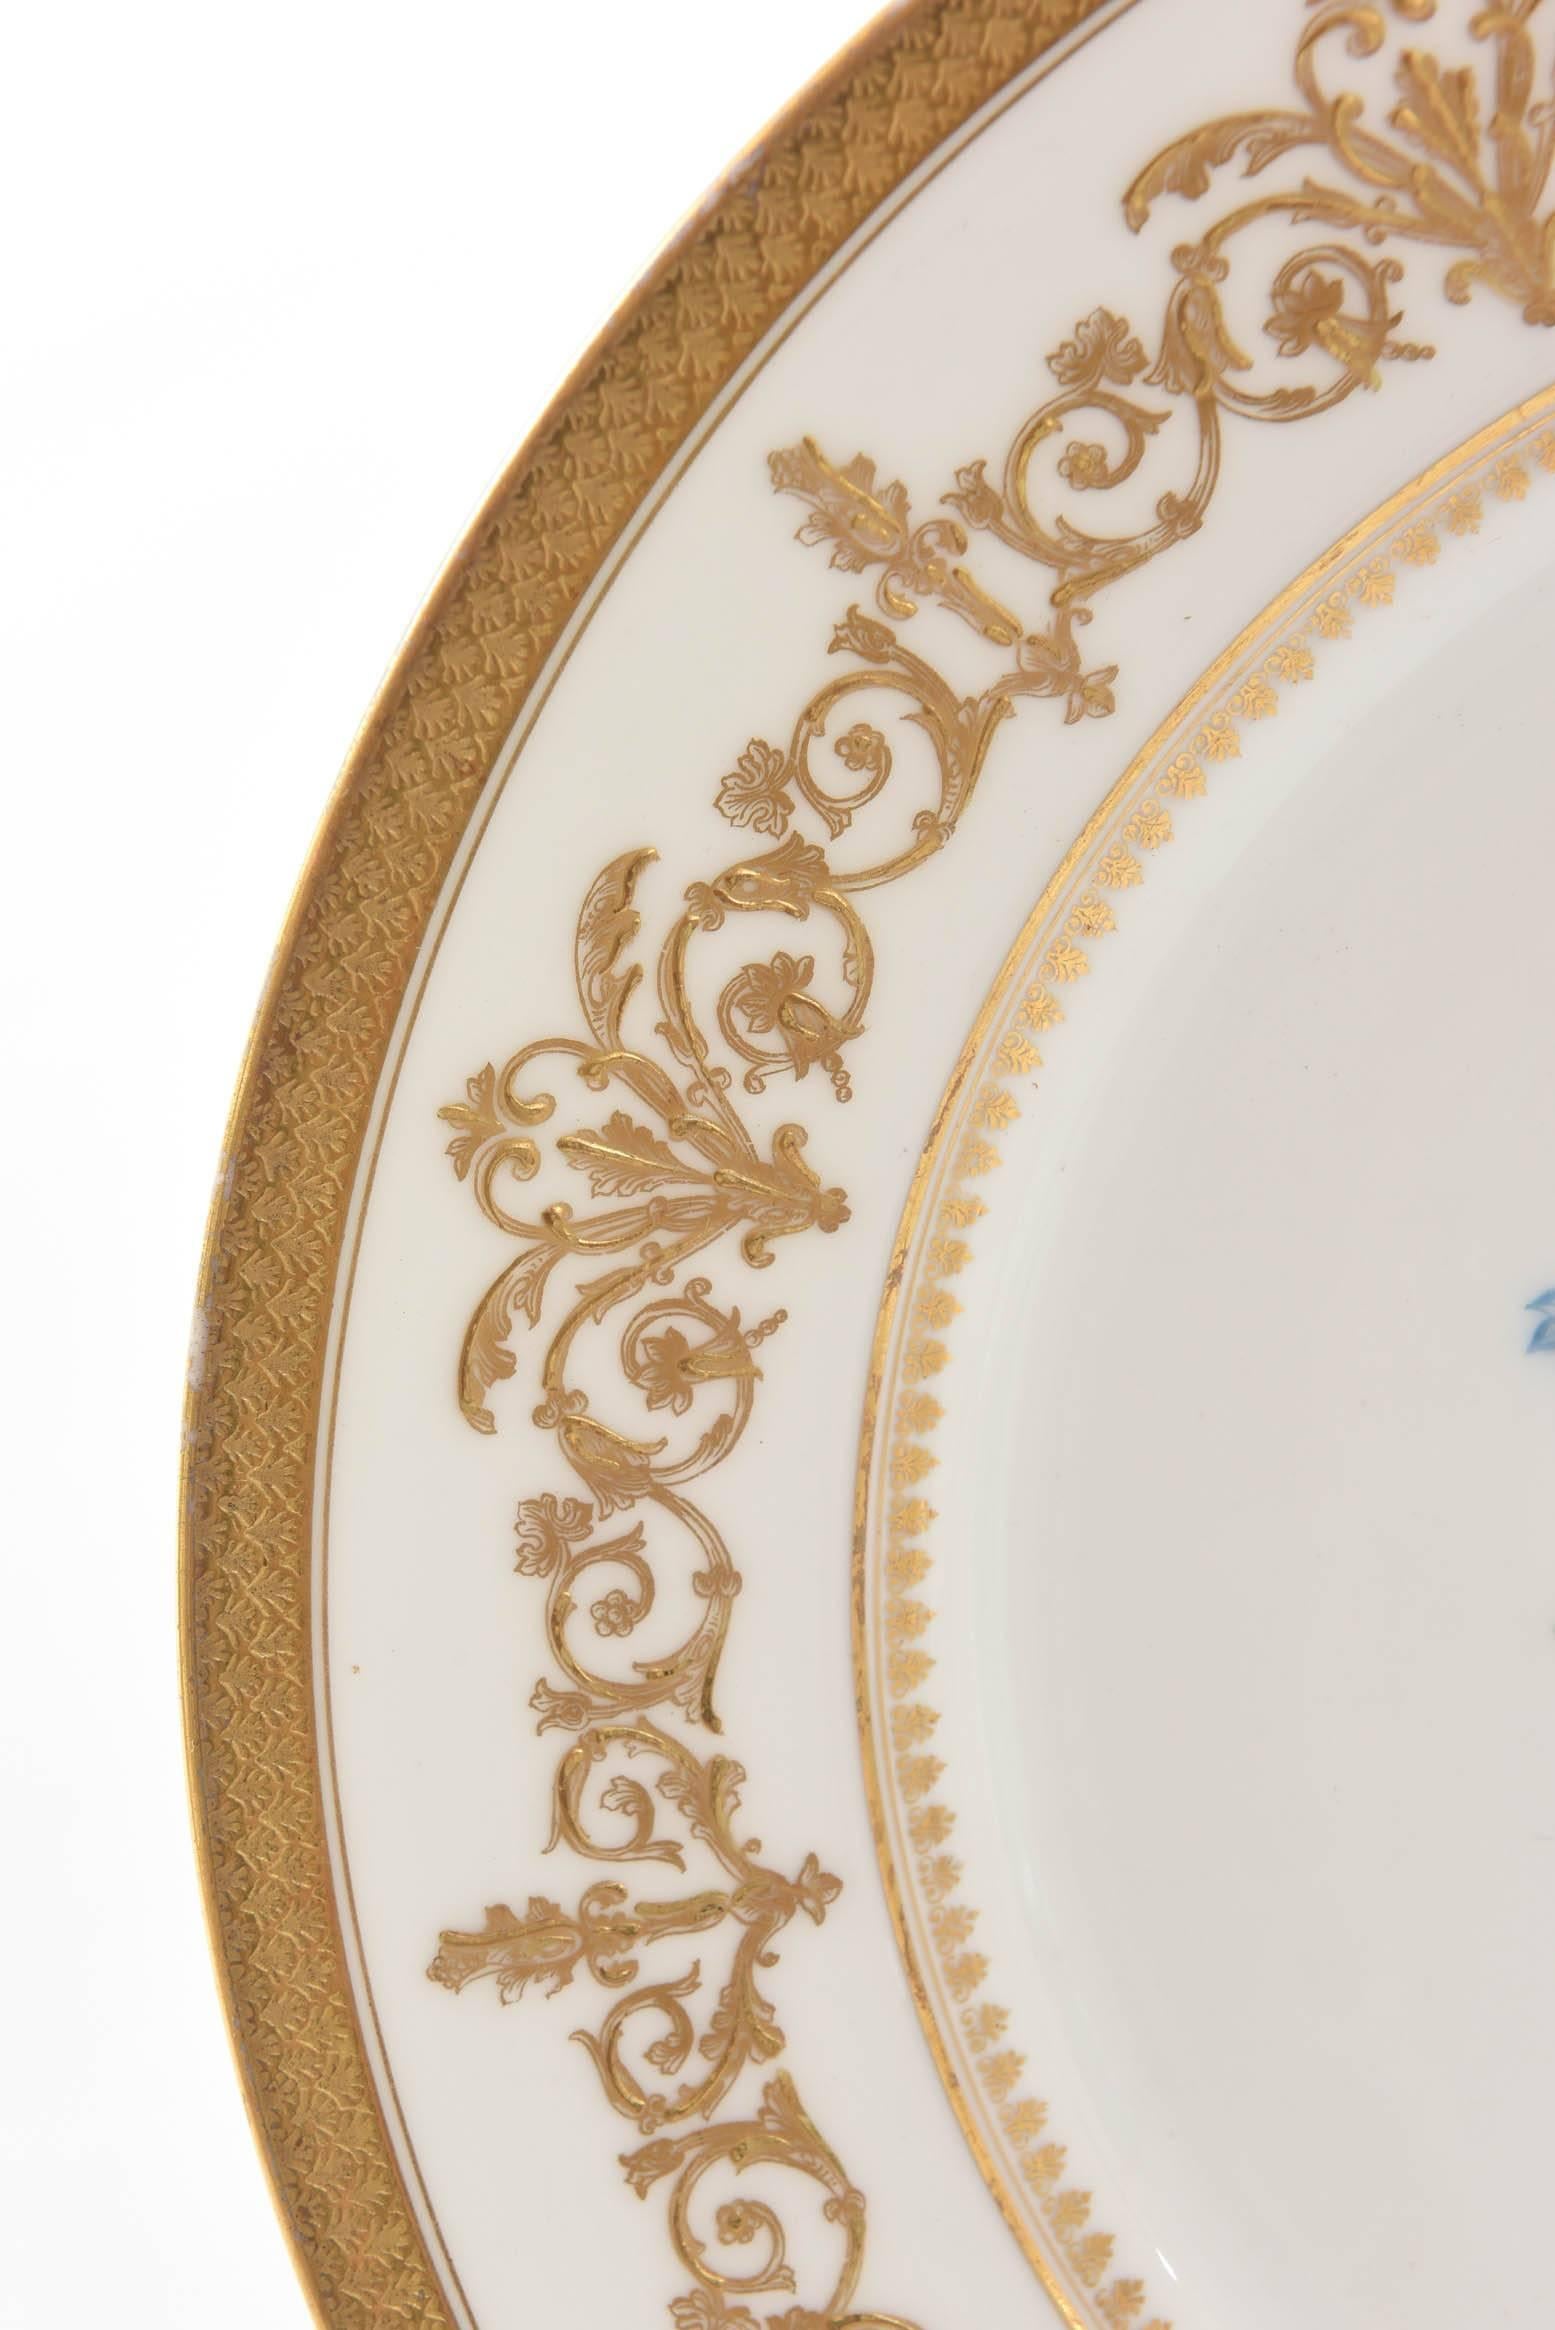 French Antique Limoges Floral Plates, Raised Gilt Accents, Set of Six